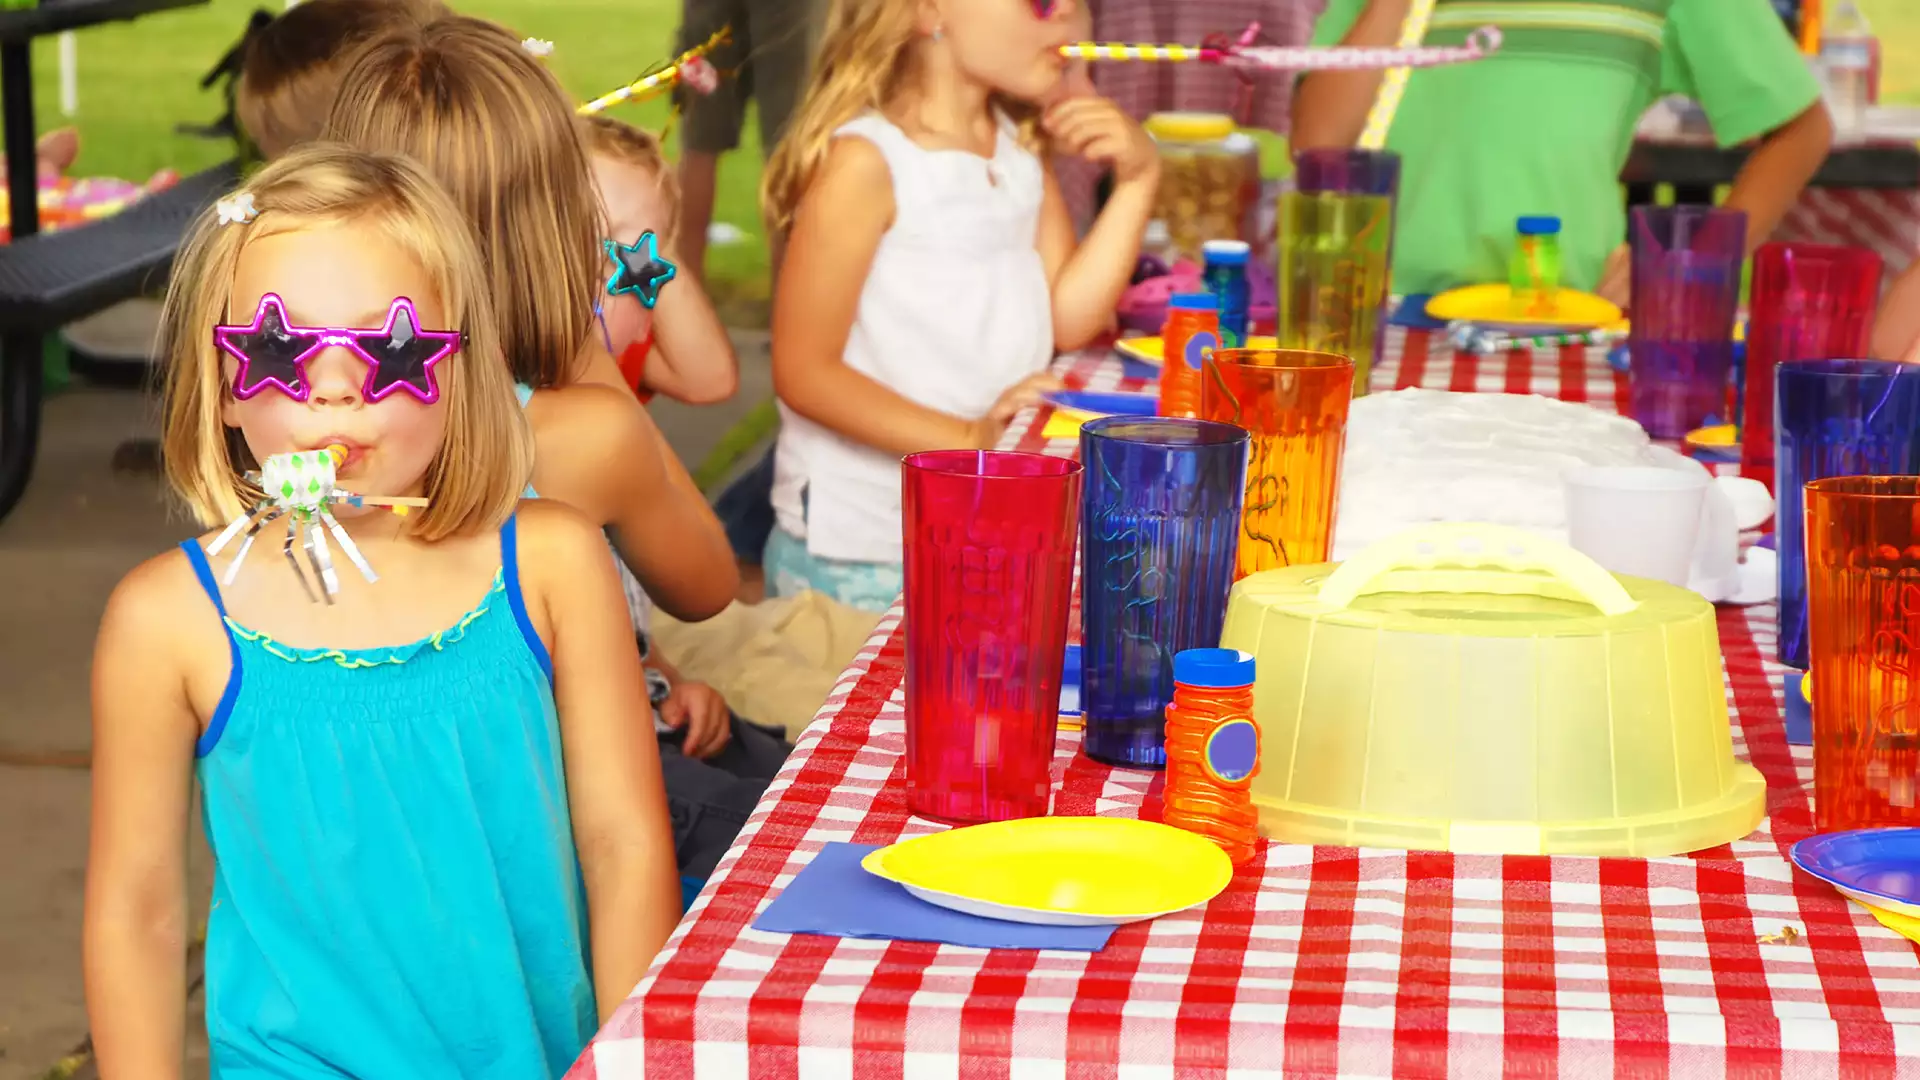 4 REASONS TO HAVE YOUR BIRTHDAY PARTY AT IMPACT FUN ZONE